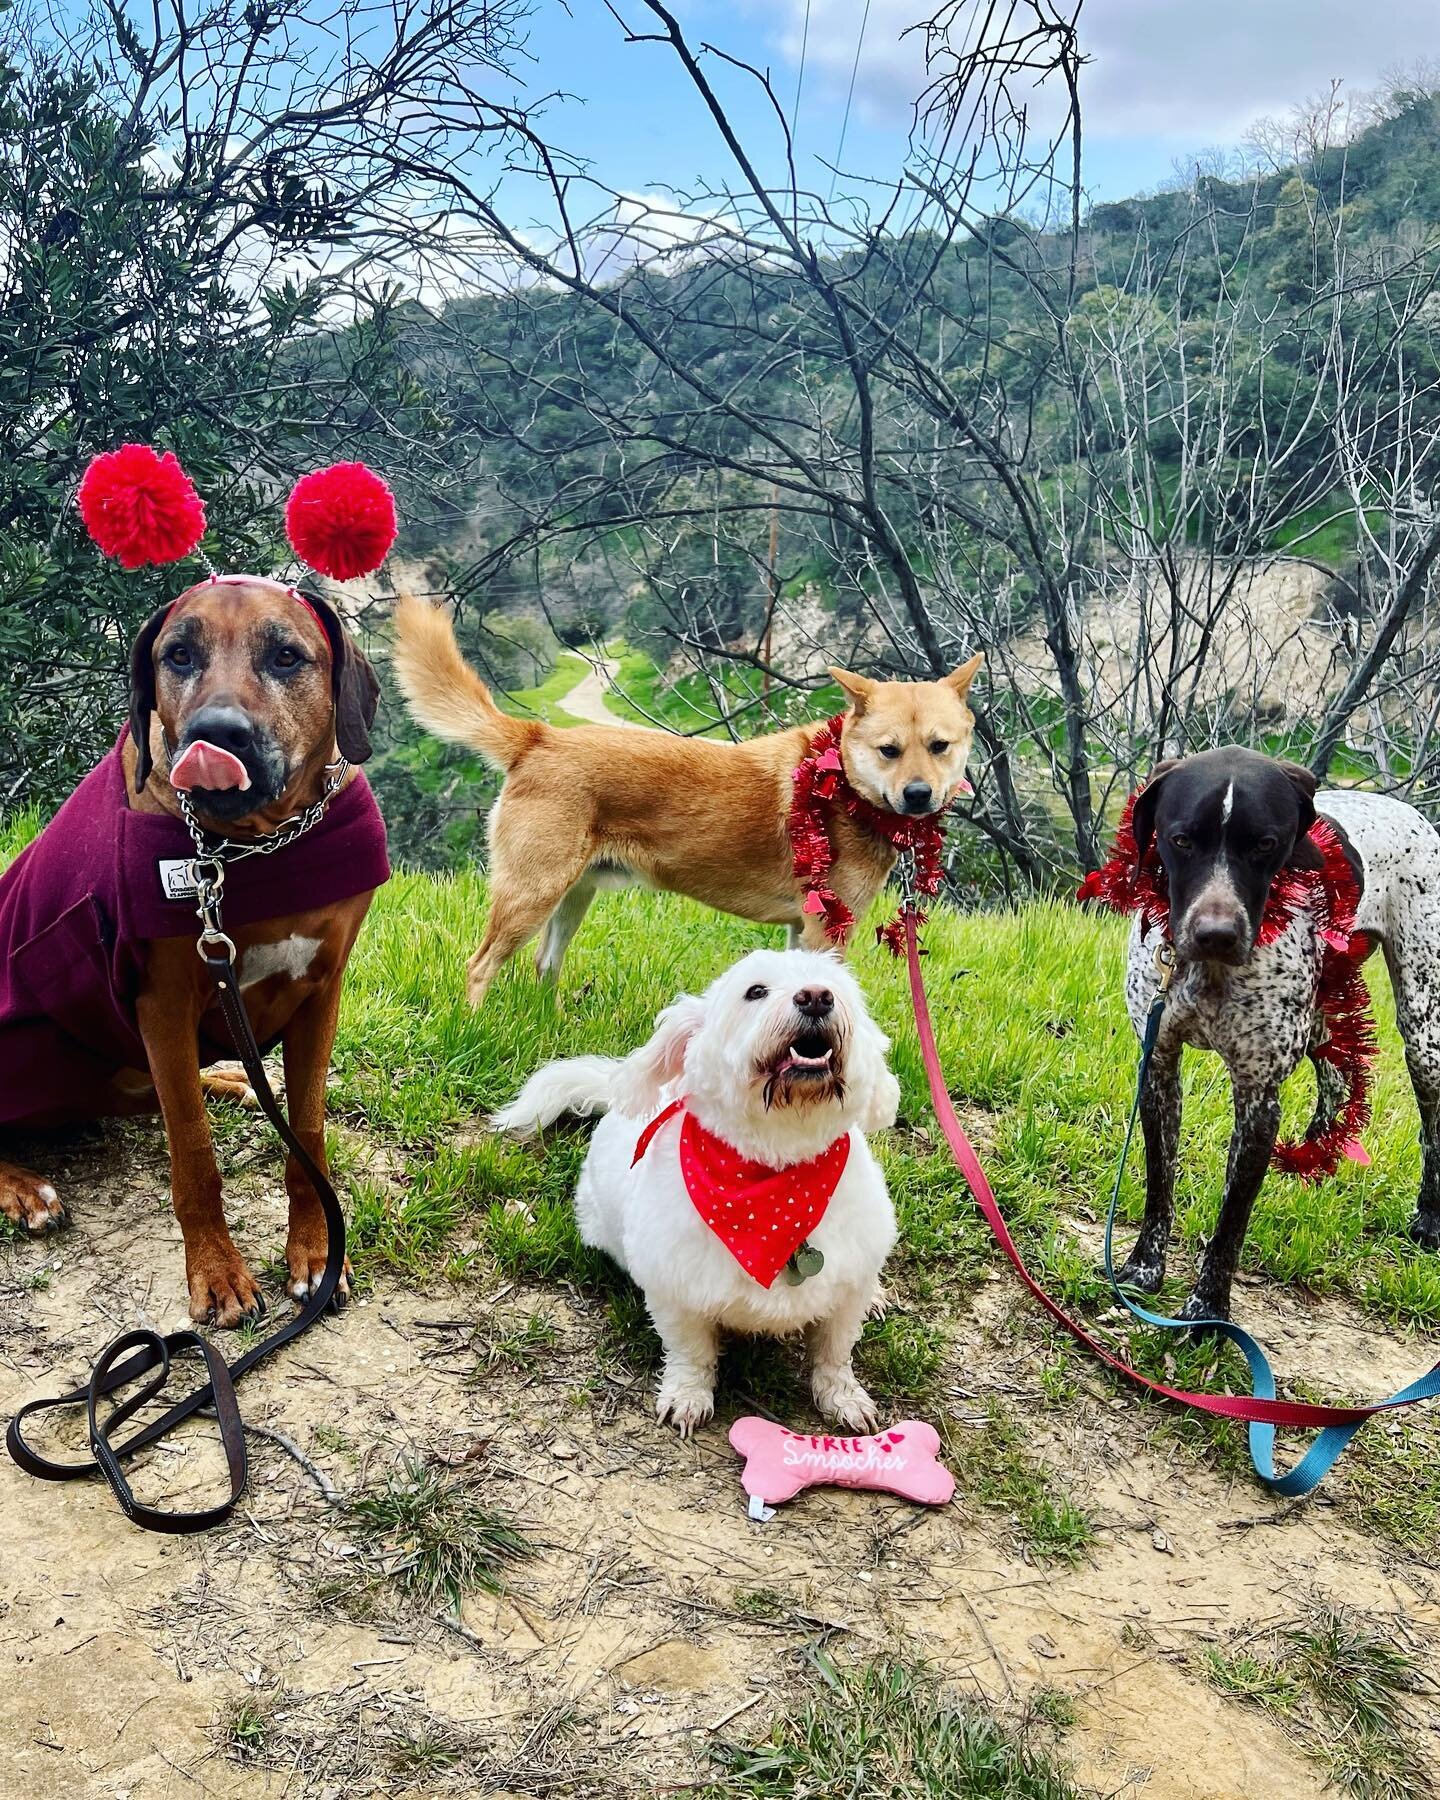 We hope everyone had an amazing Valentine&rsquo;s Day!! Here are just some of our Valentines cuties who kept yesterday sweet and sassy for us!! We&rsquo;re so grateful for their unconditional love 🥰❤️ #packhikes #valentinesday #doggydressup #barksan